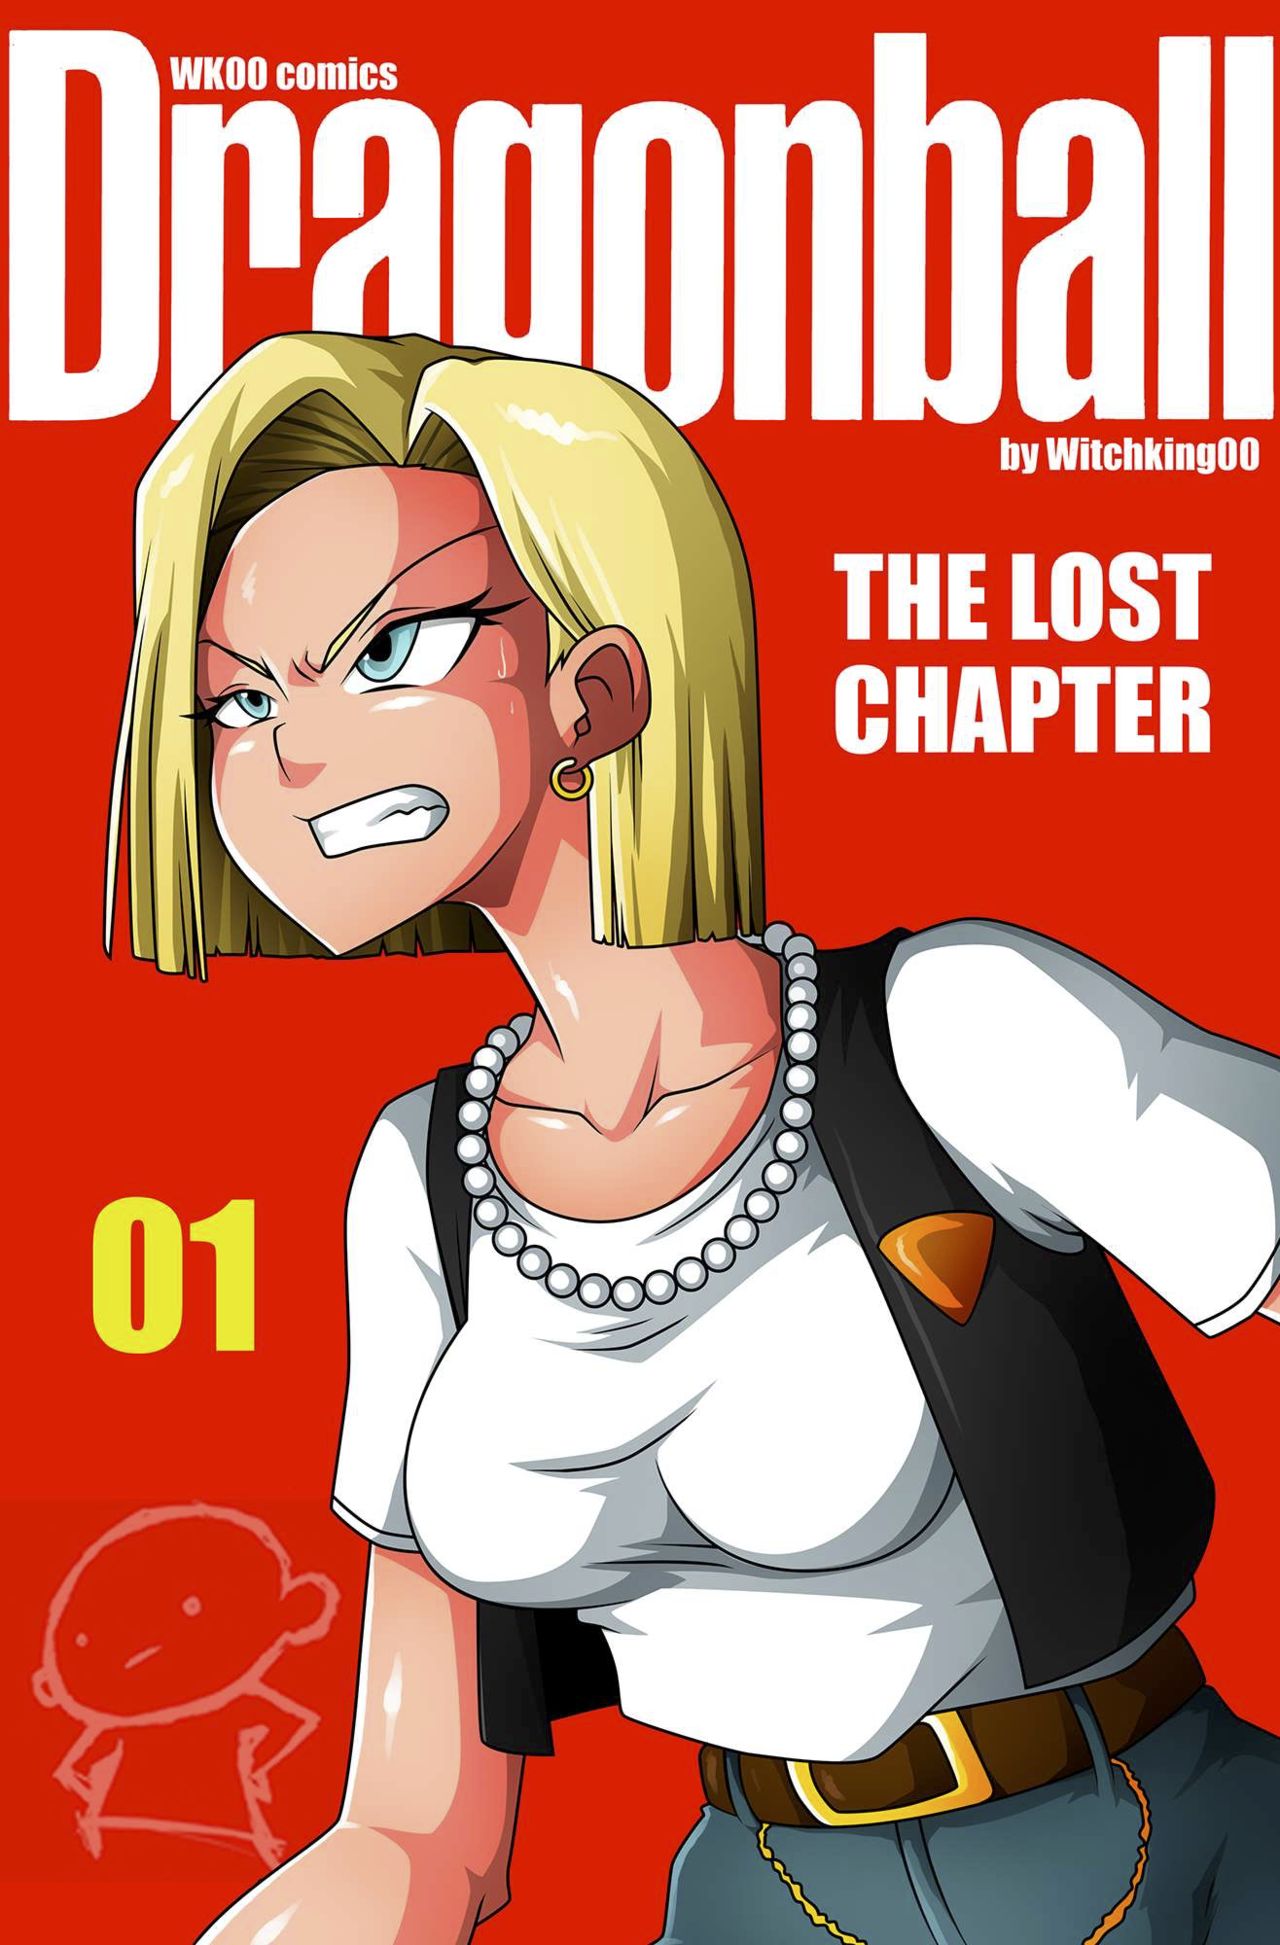 The Lost Chapter Dragon Ball Z 01